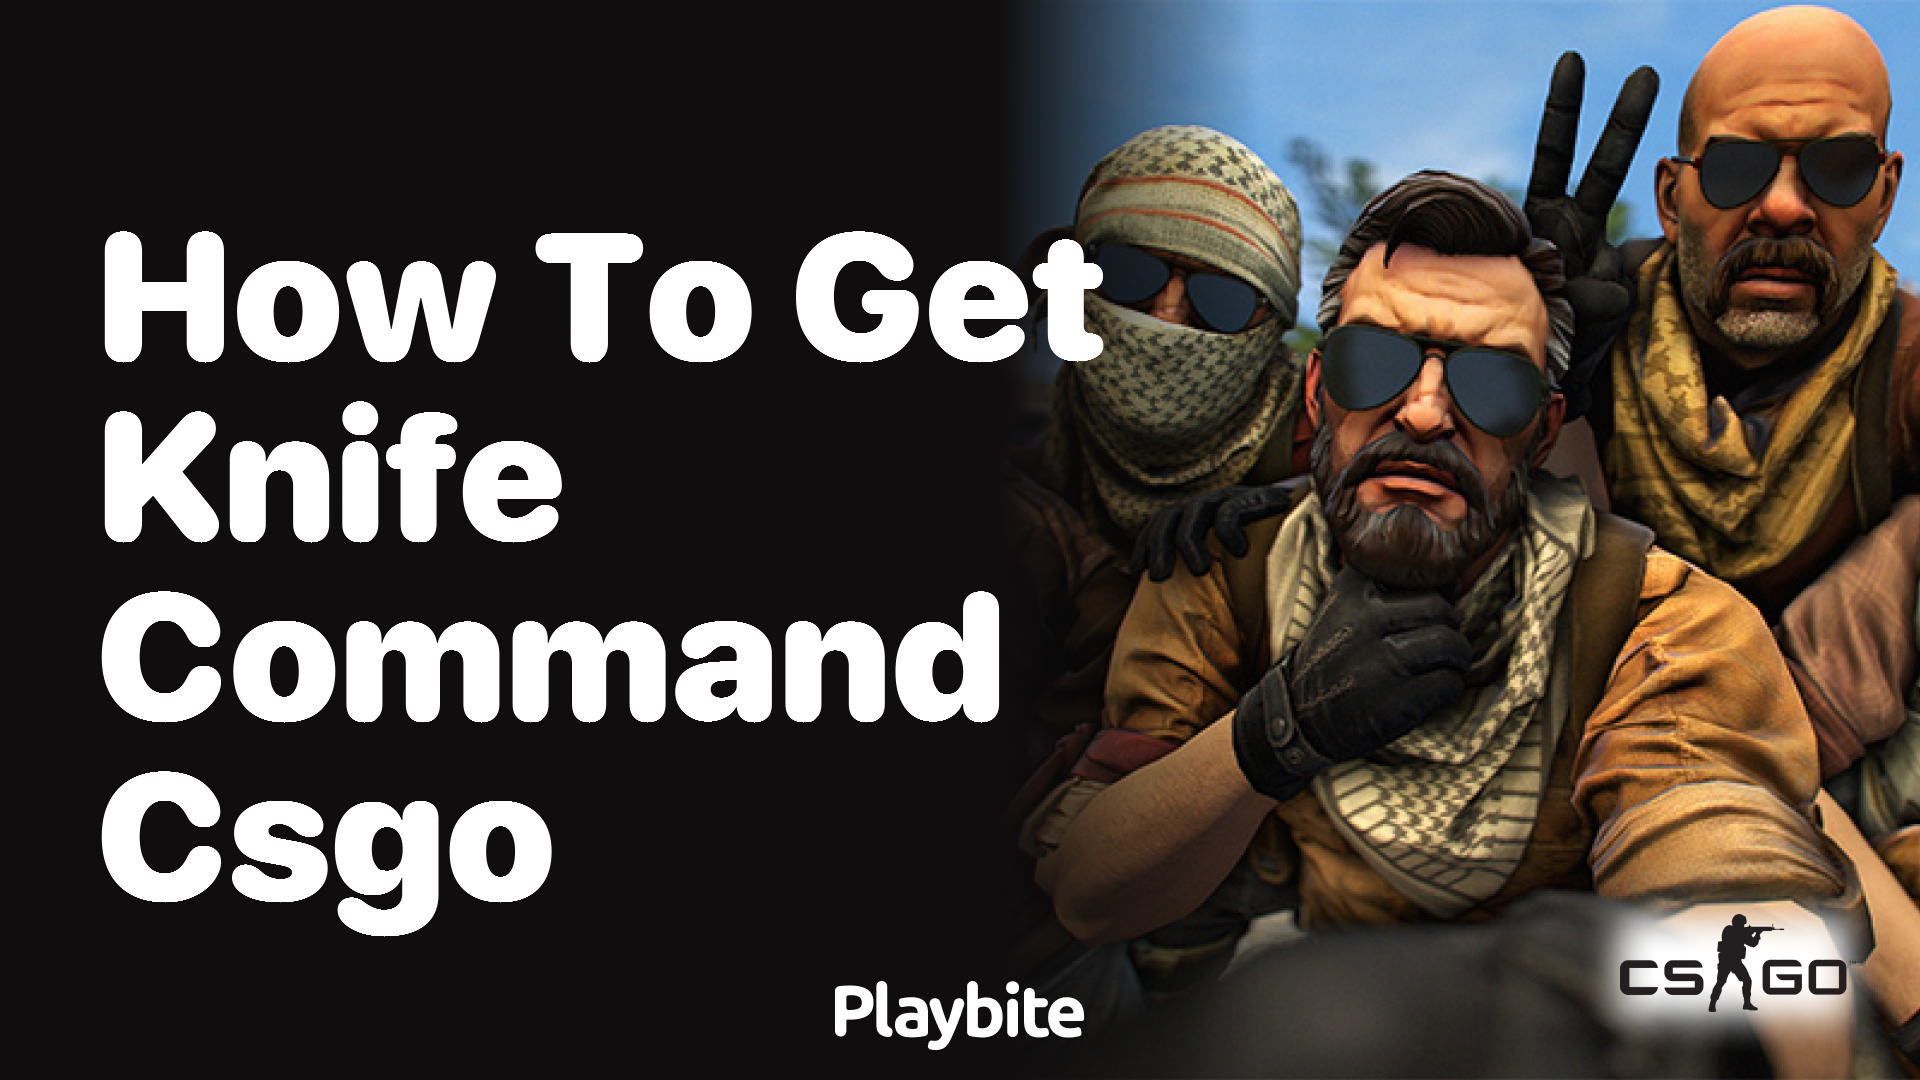 How to get knife command in CS:GO